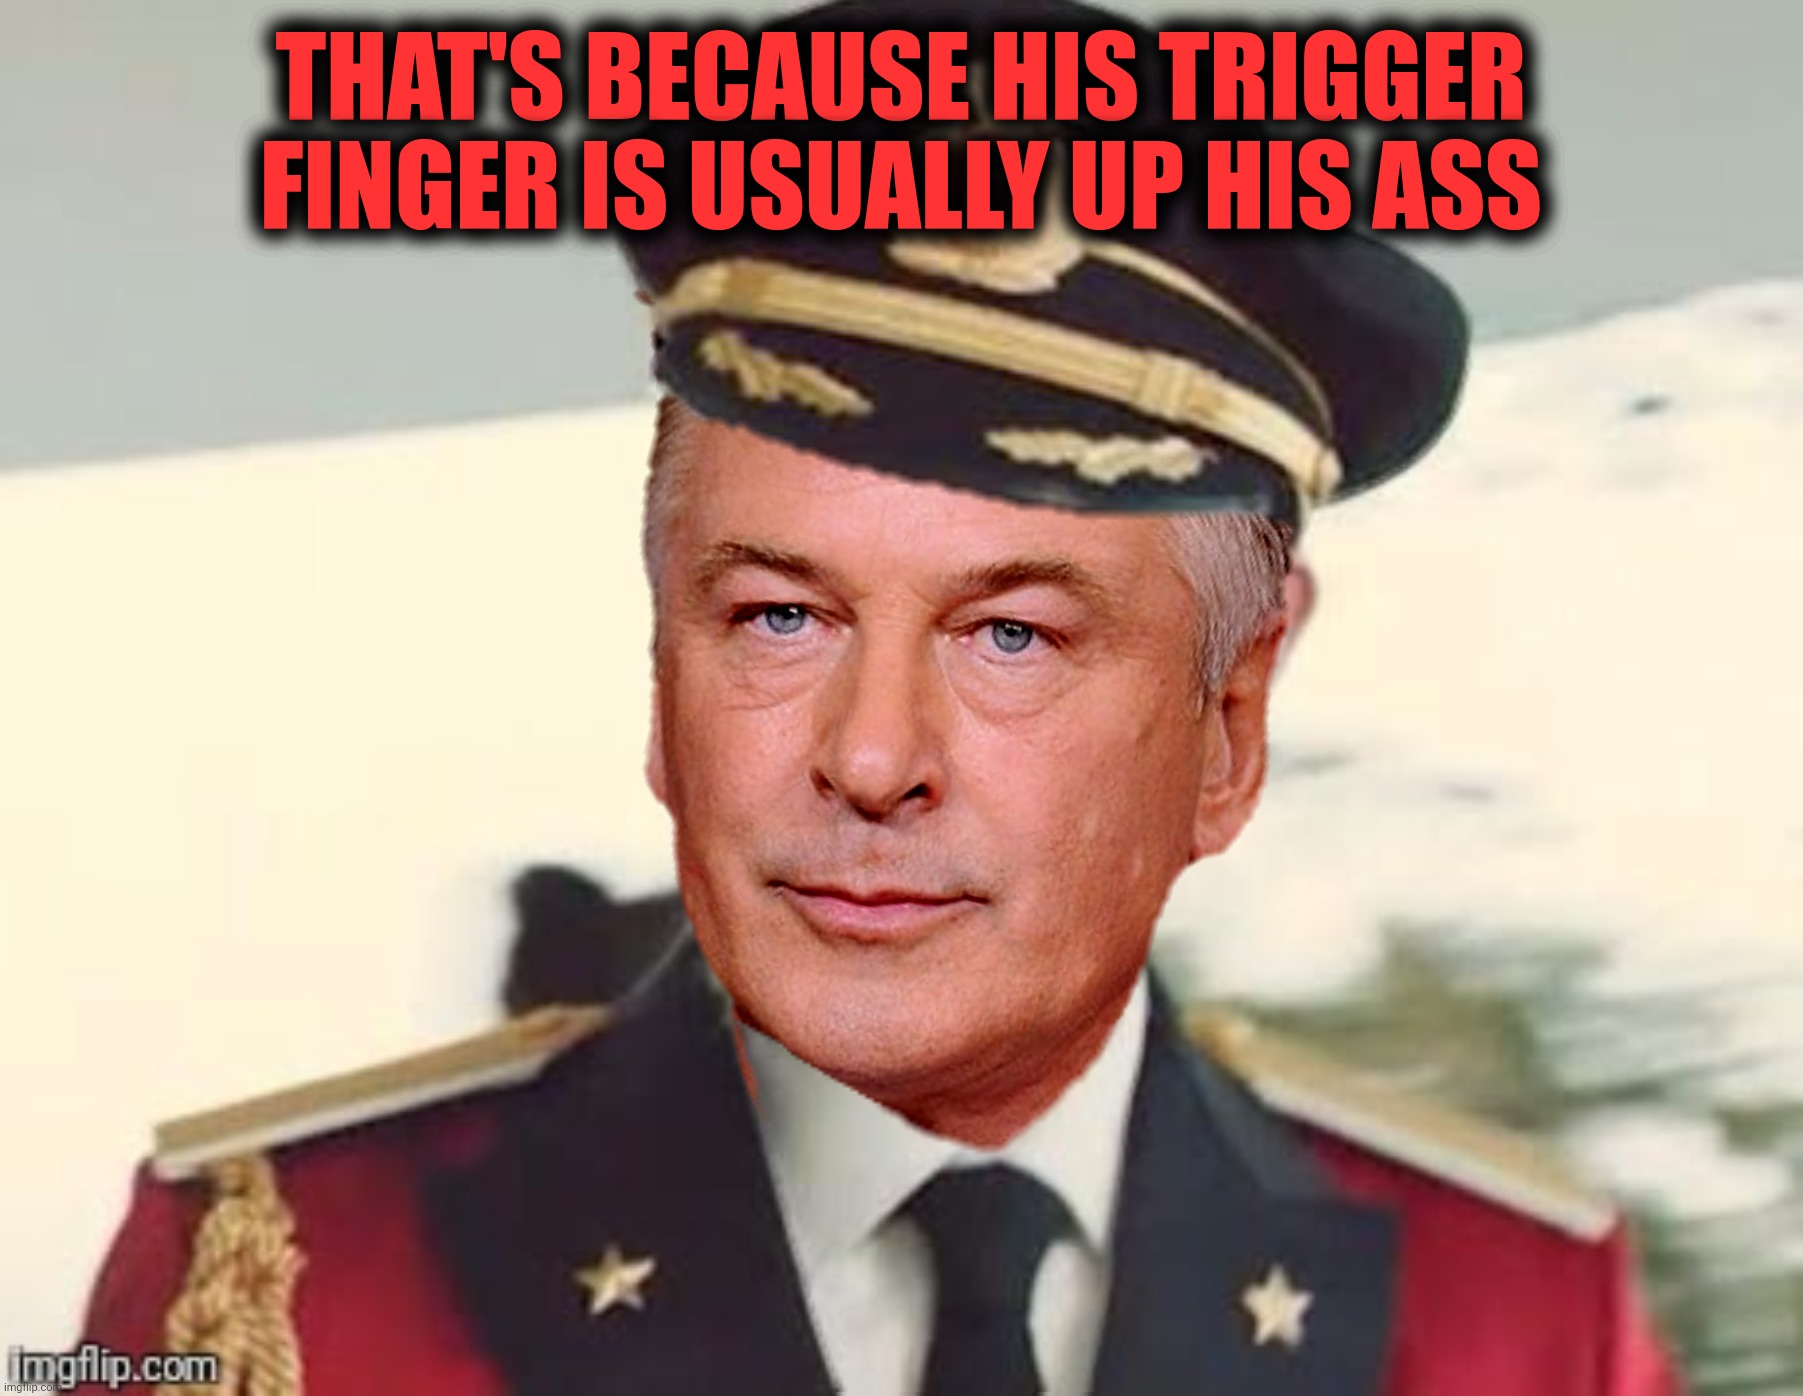 THAT'S BECAUSE HIS TRIGGER FINGER IS USUALLY UP HIS ASS | made w/ Imgflip meme maker